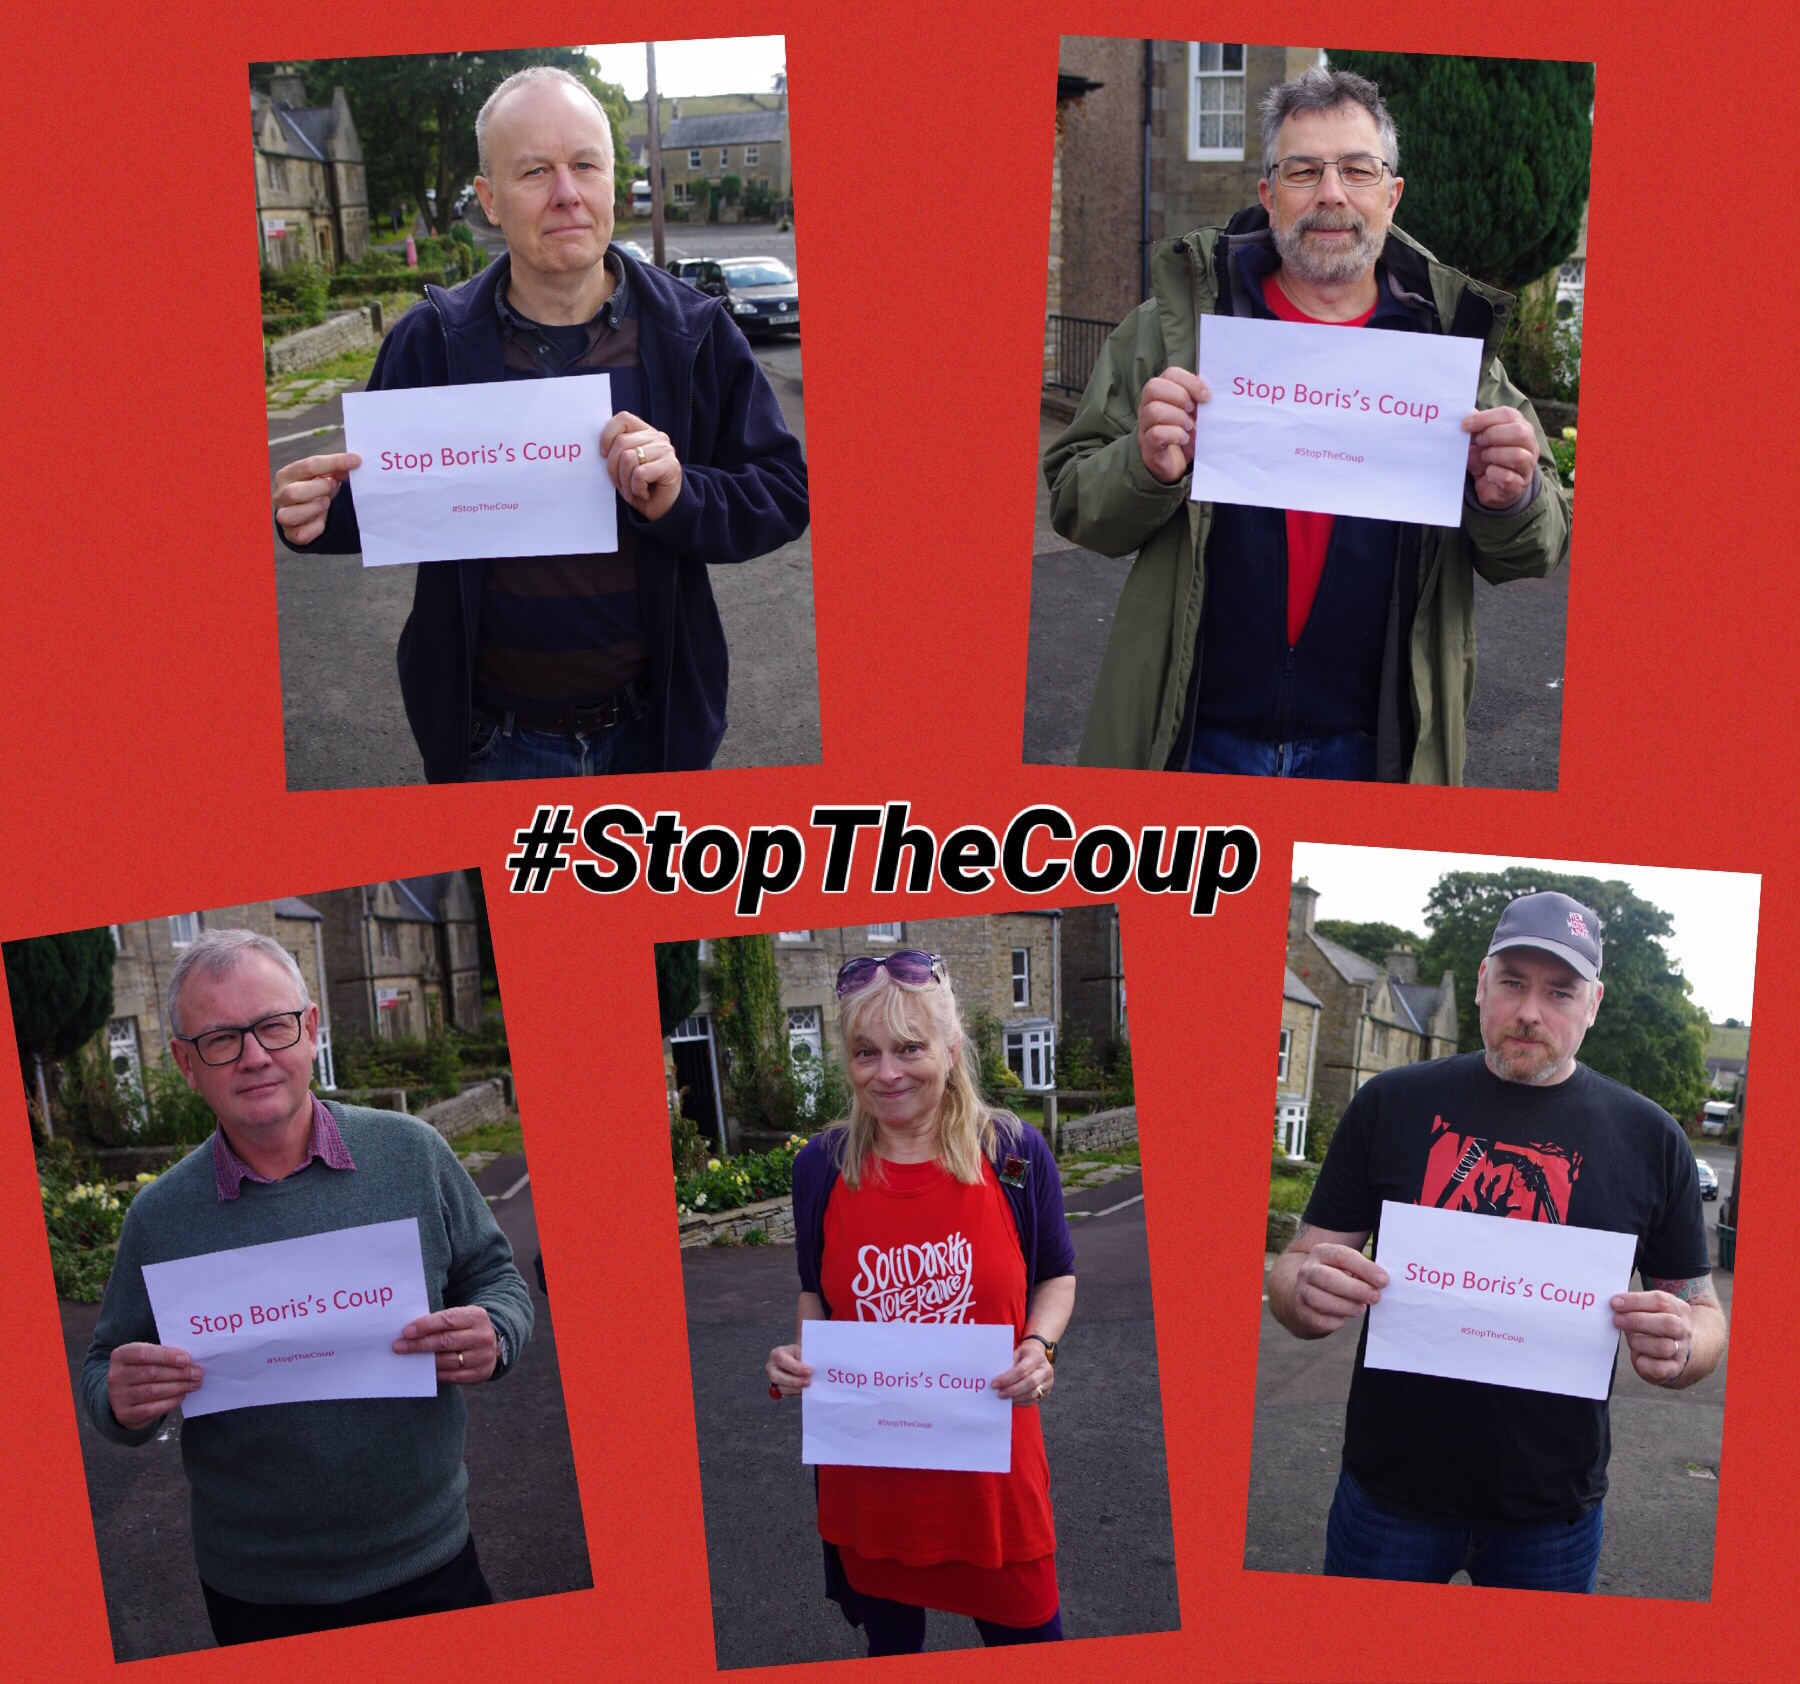 #StopThe Coup